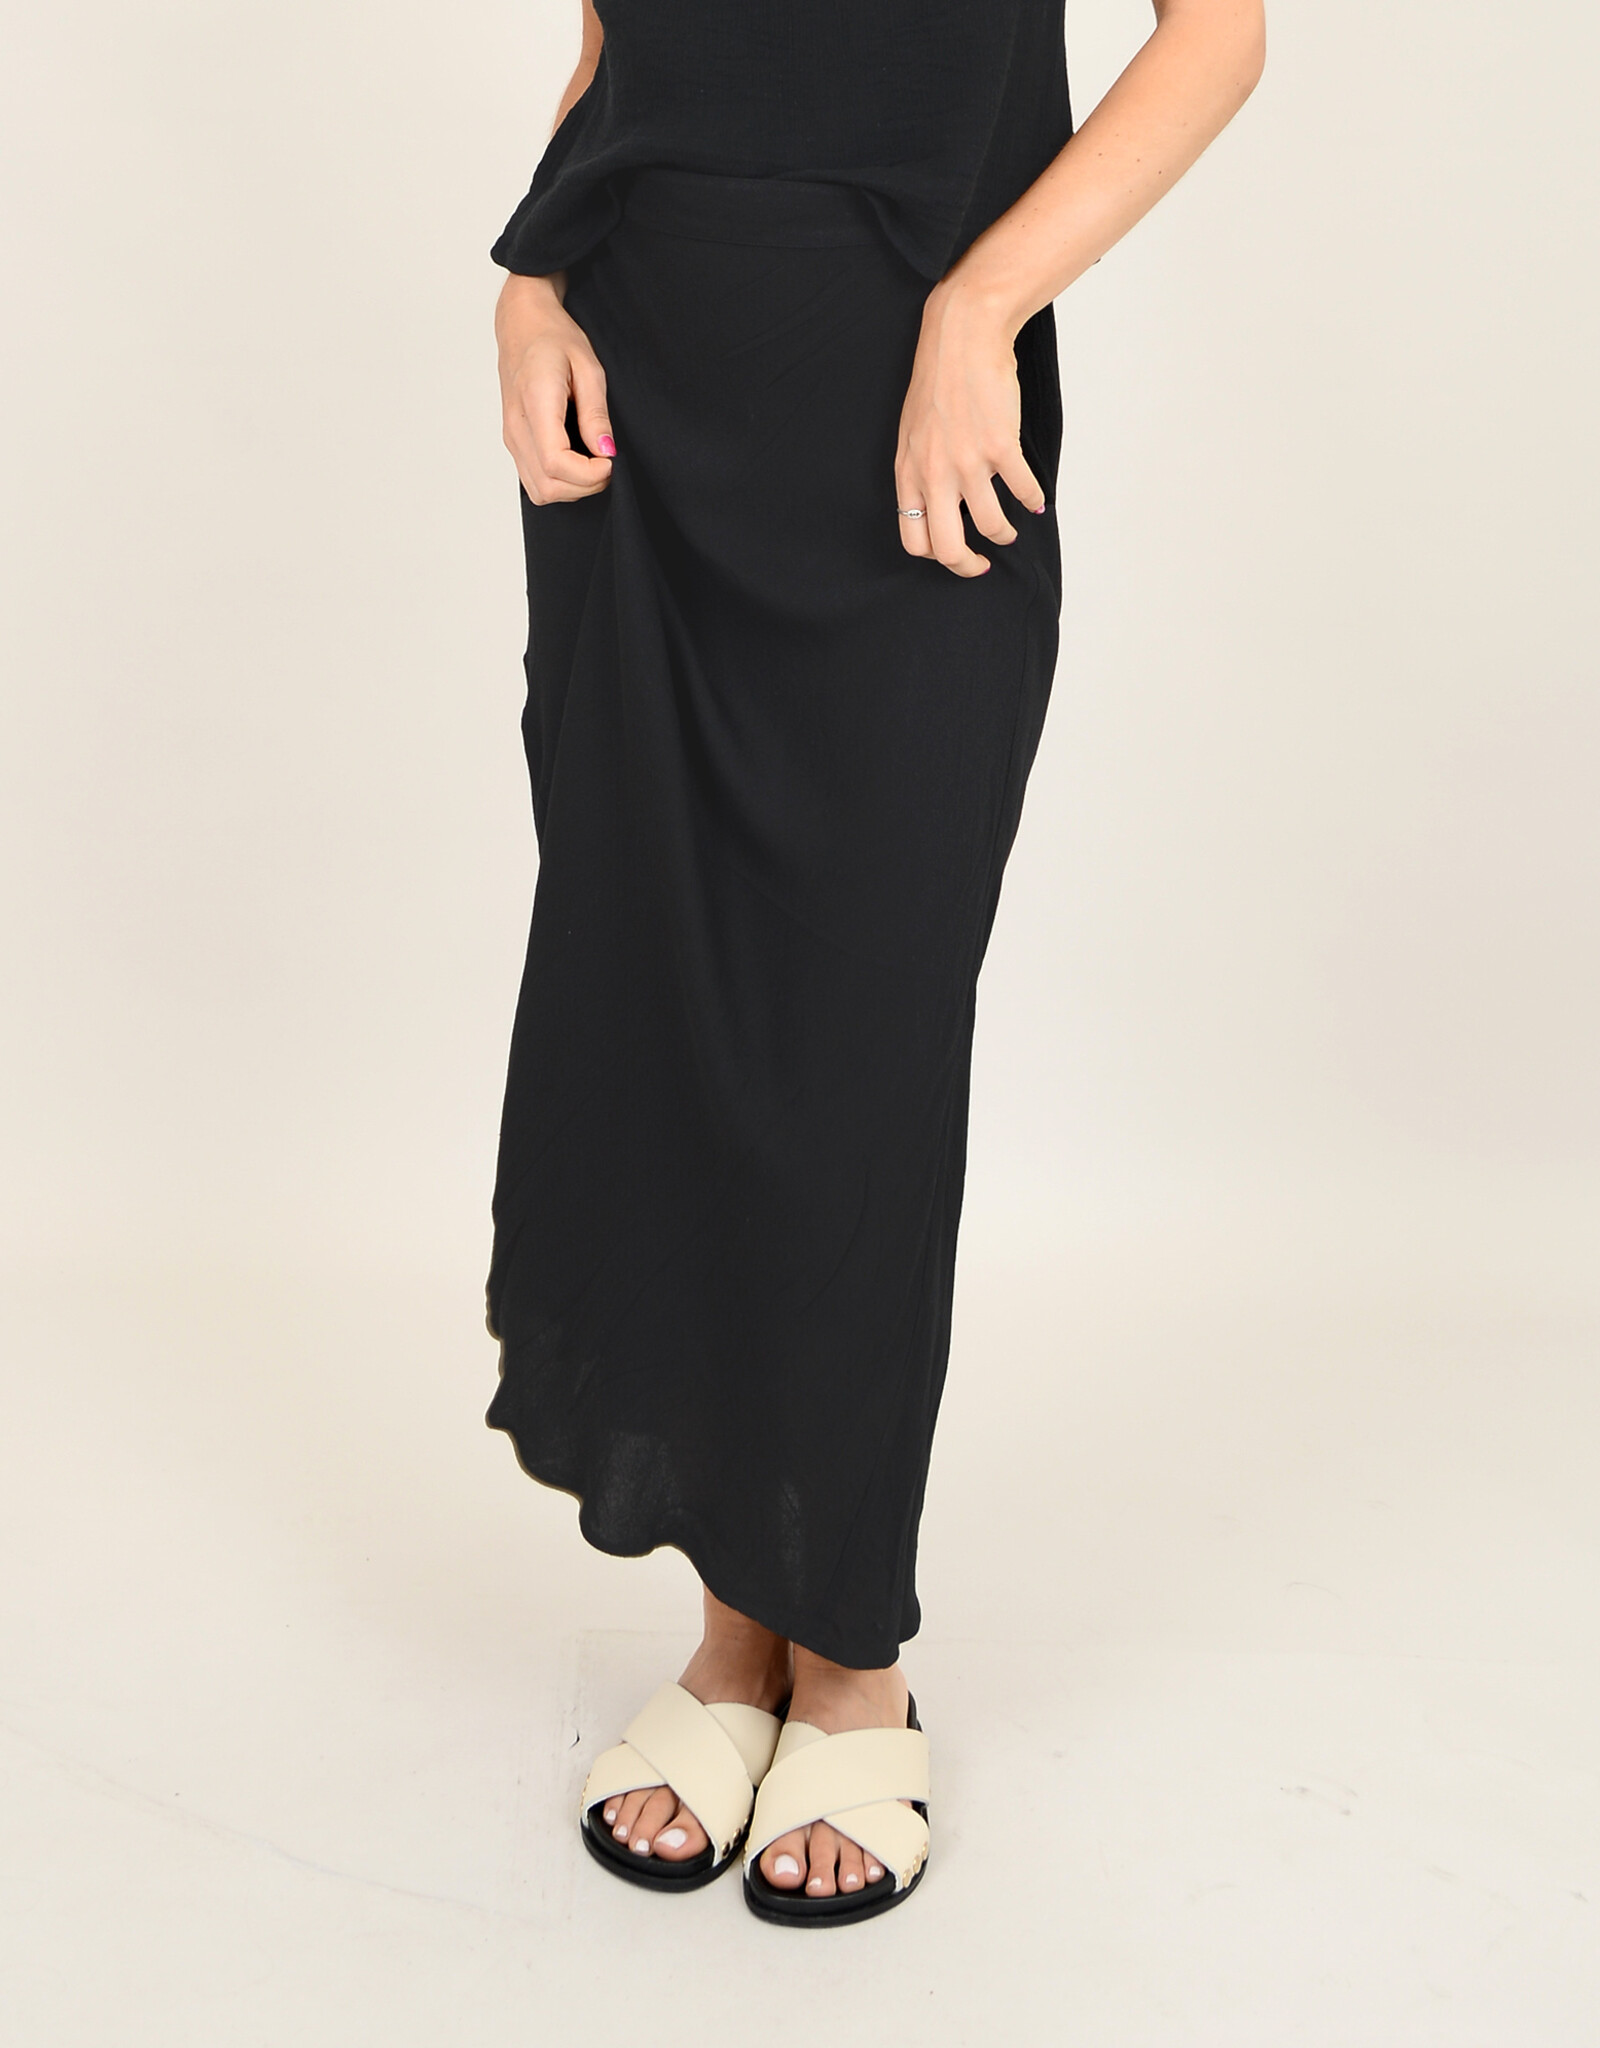 RD Style Alicent Crepe Skirt